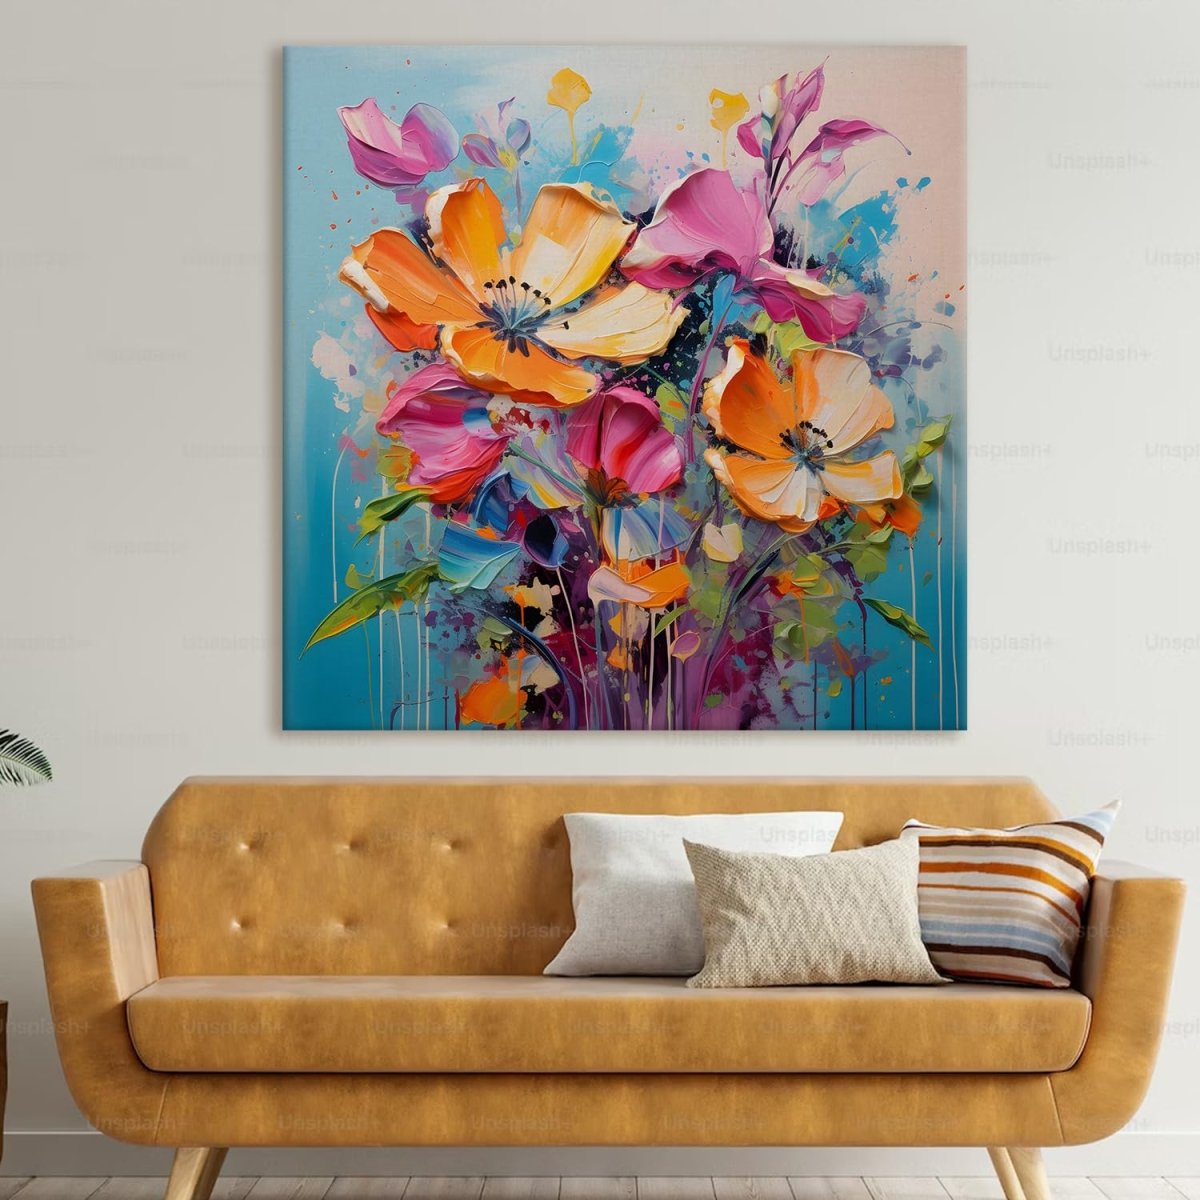 A Moment of Reflection Floral Canvas Wall Design (36 x 36 Inches)